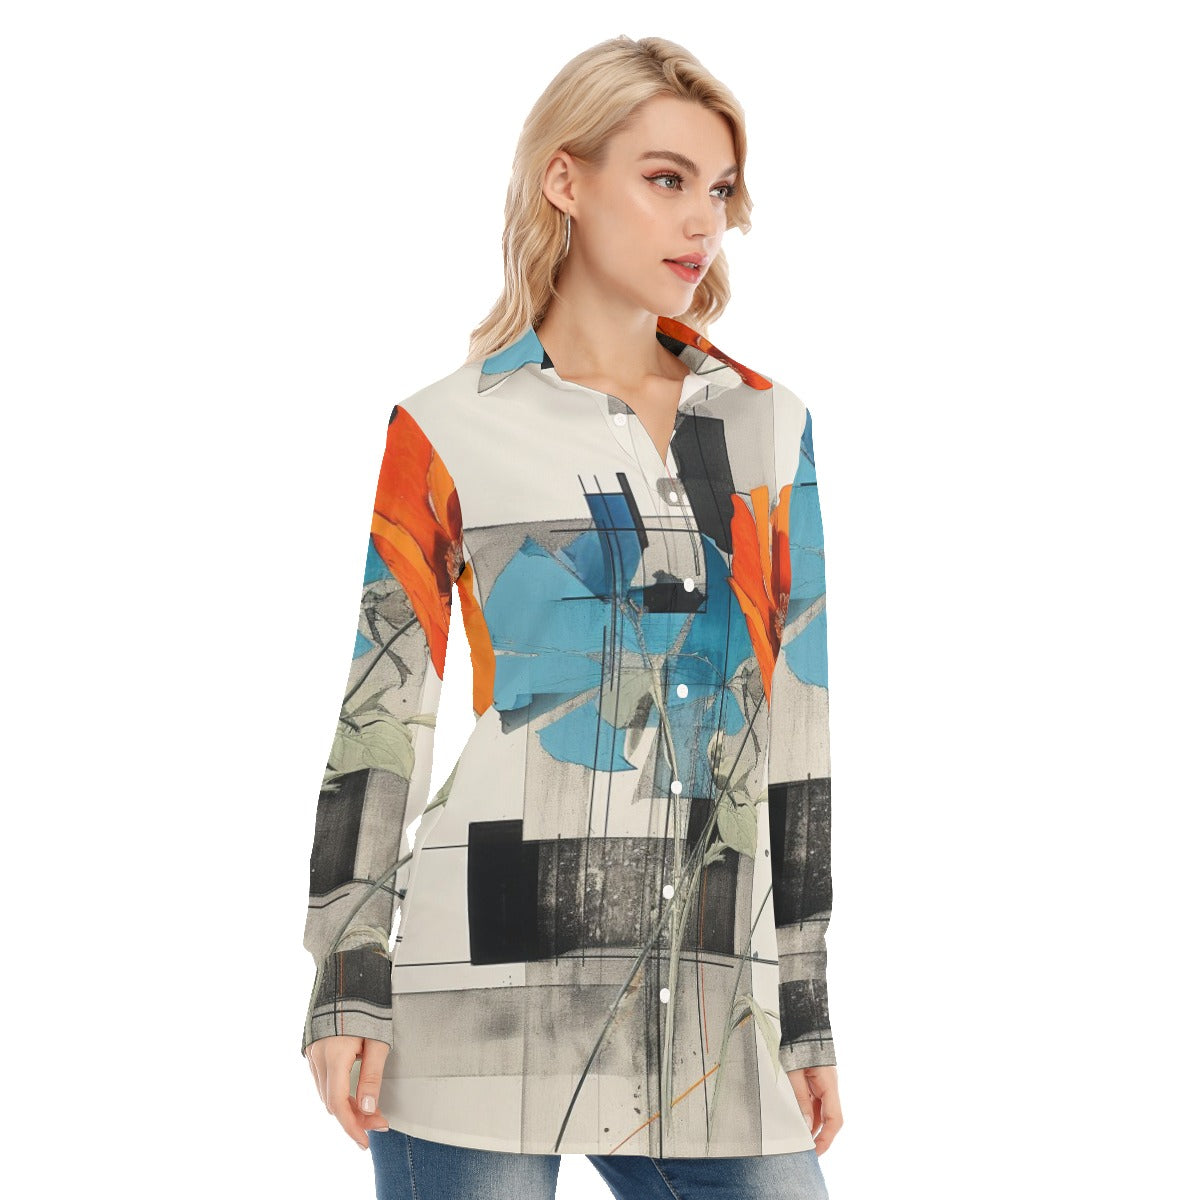 3R9GG All-Over Print Women's Long Shirt |115GSM 98% Cotton and 2% spandex